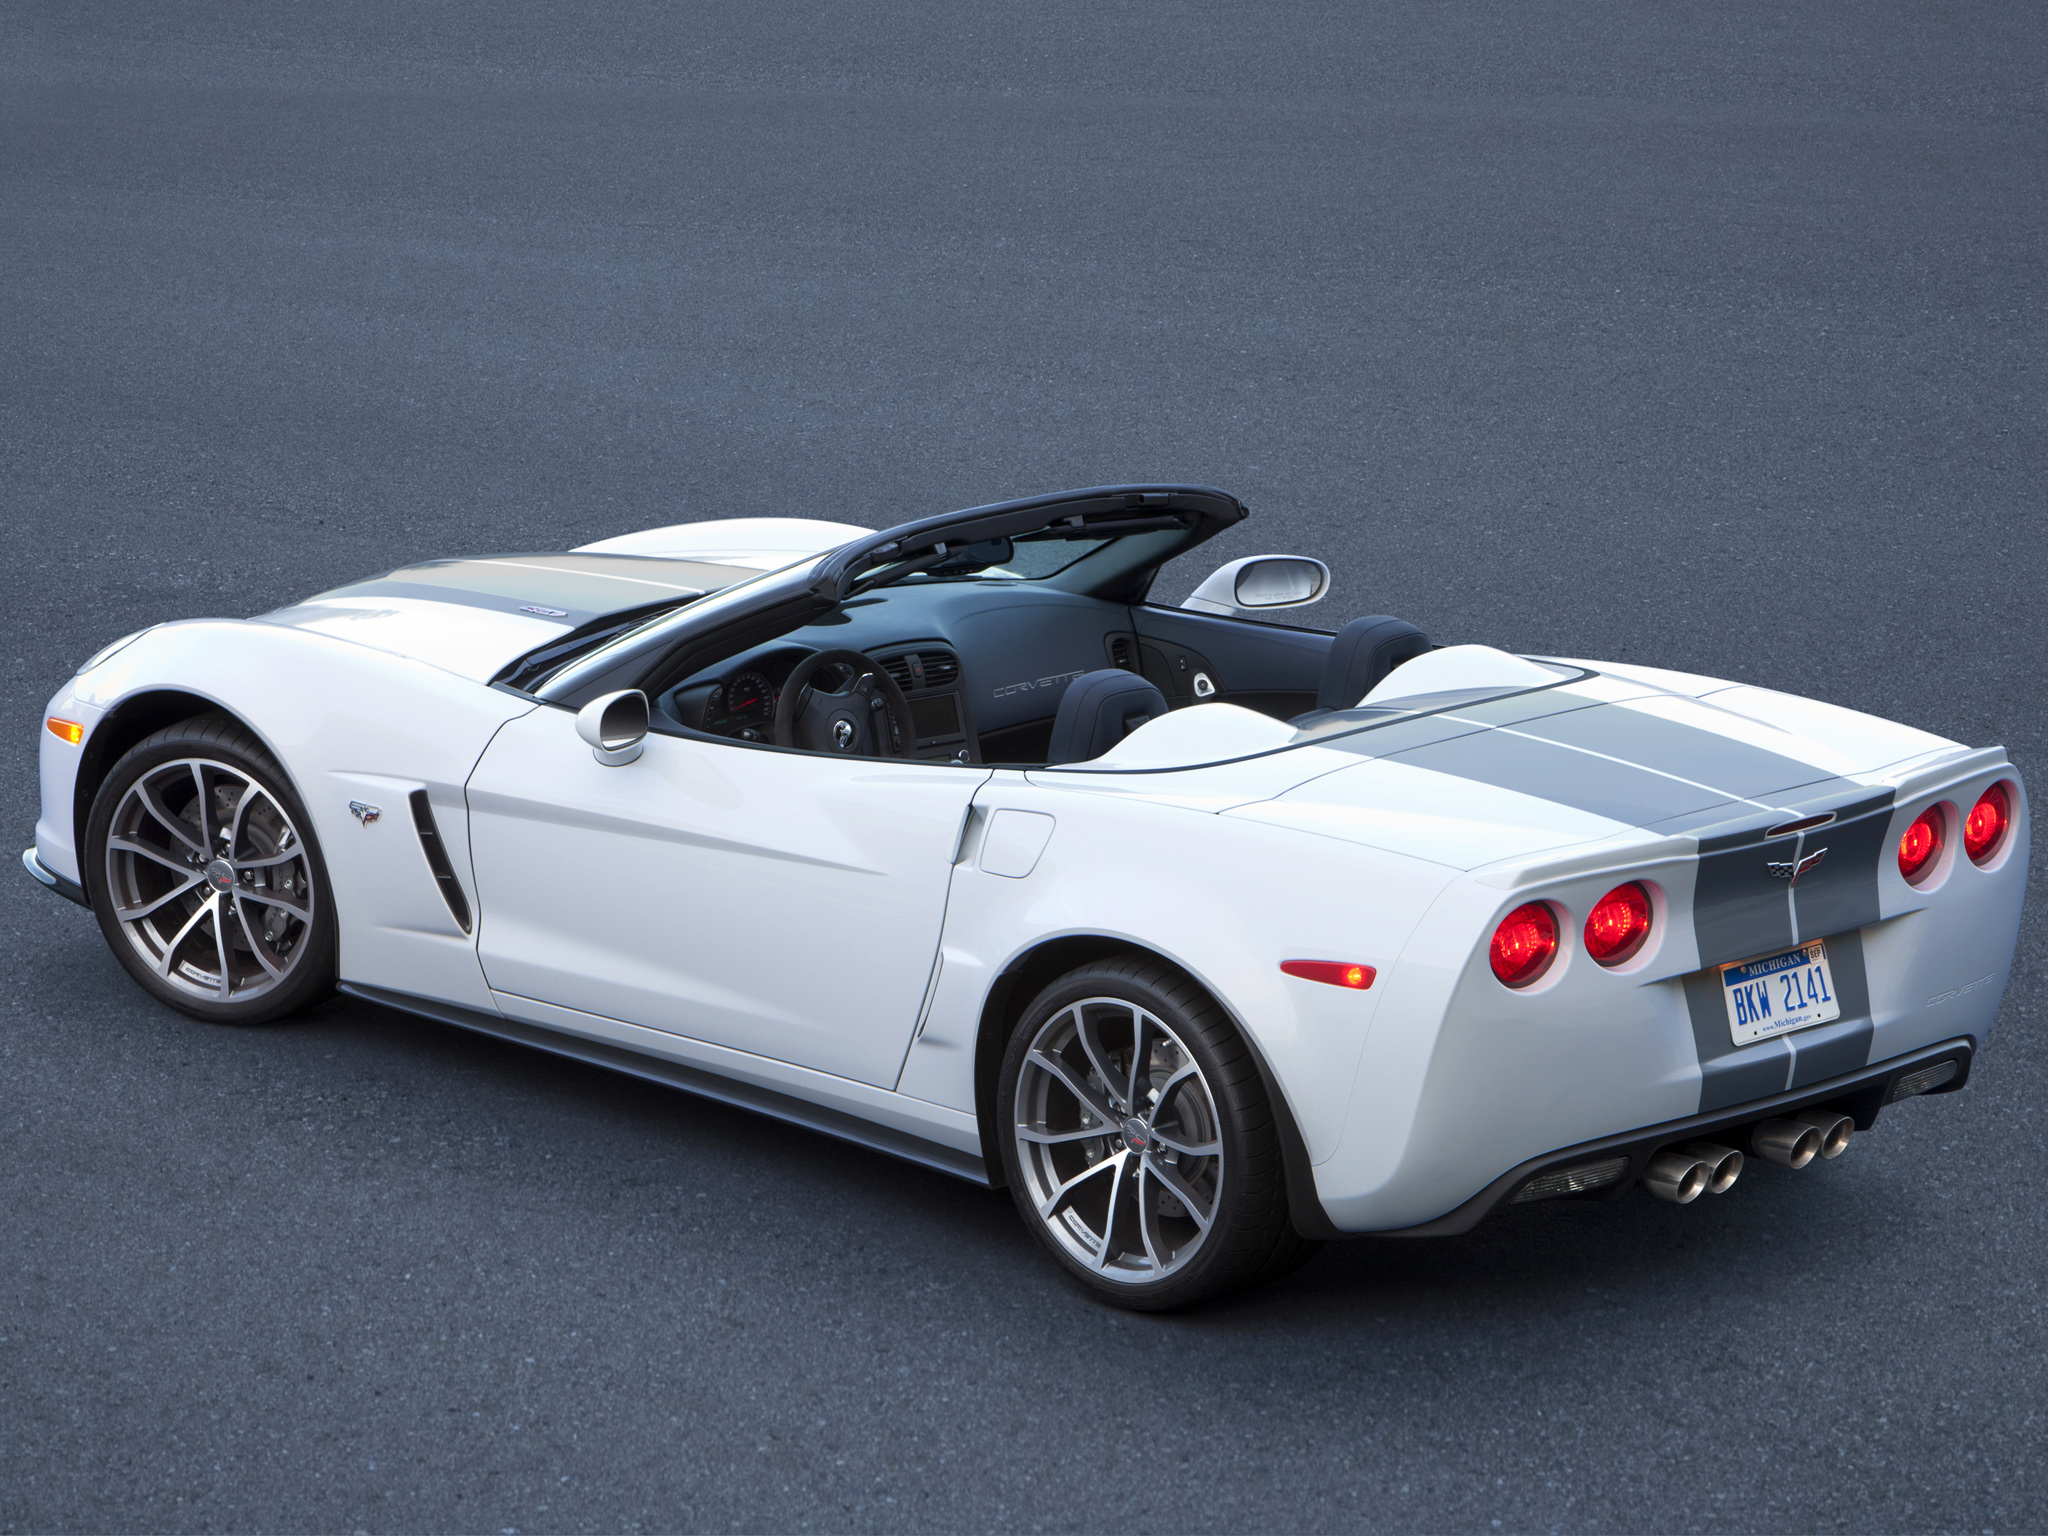 The 505-hp (337 kW) 2013 Corvette 427 Convertible is the fastest, most-capable convertible in Corvette's history, and is available in all colors, including the white-over-blue 60th Anniversary package that commemorates Corvette's debut in January, 1953.